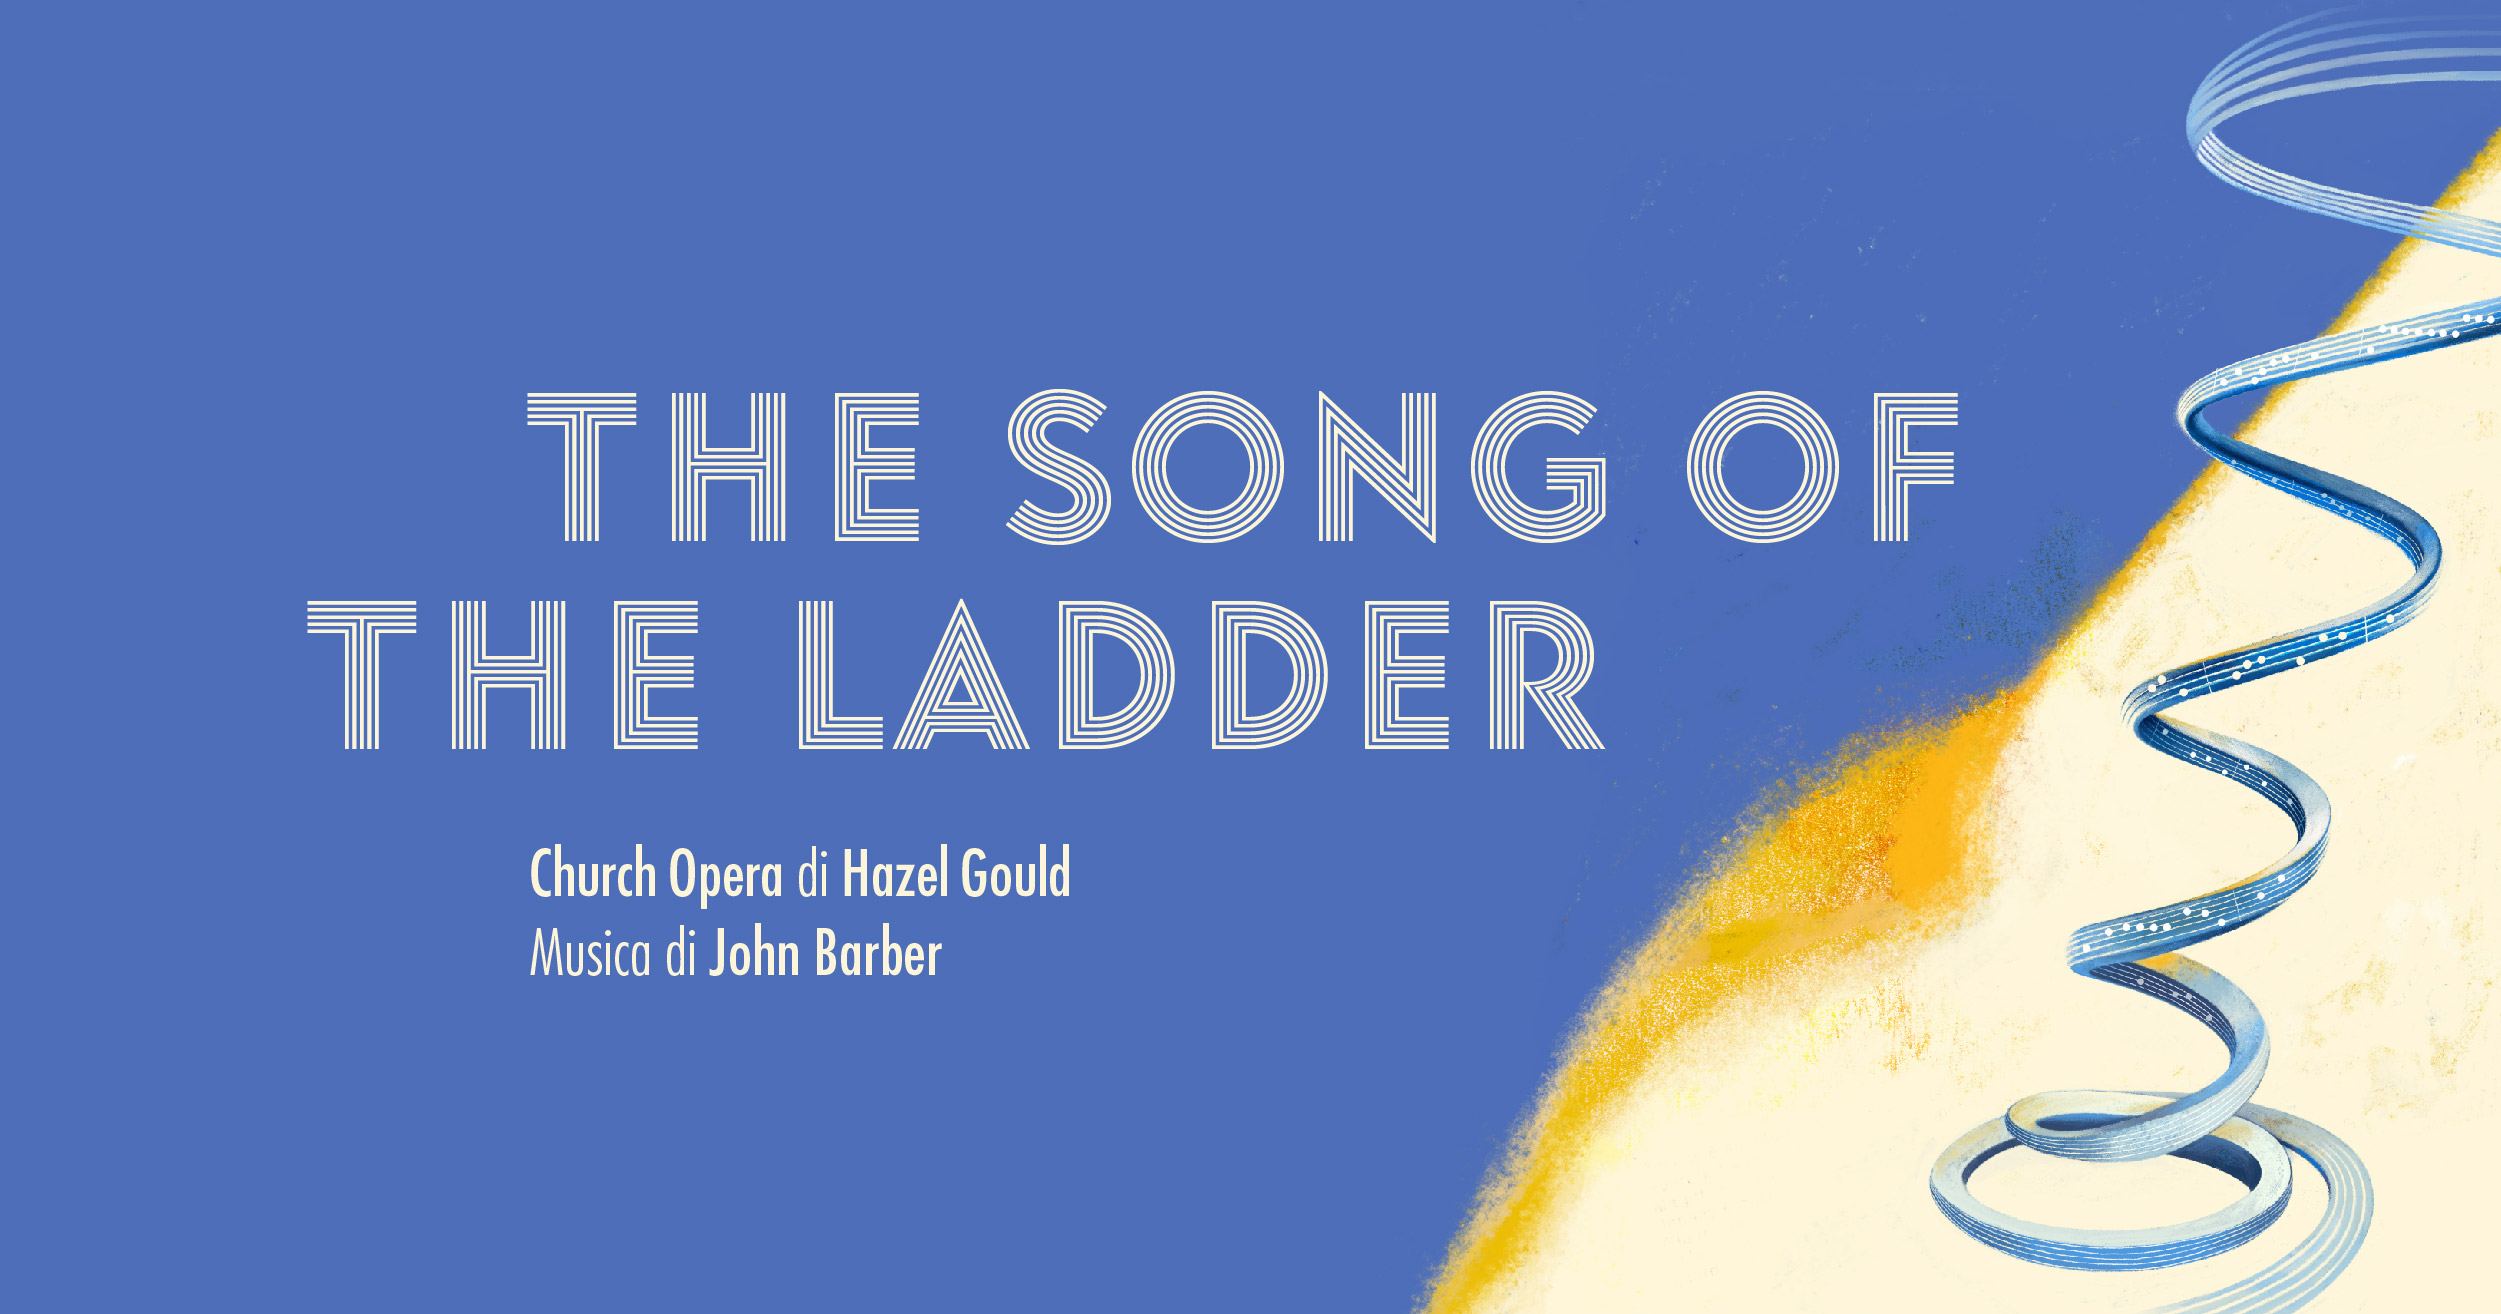 The Song of the Ladder